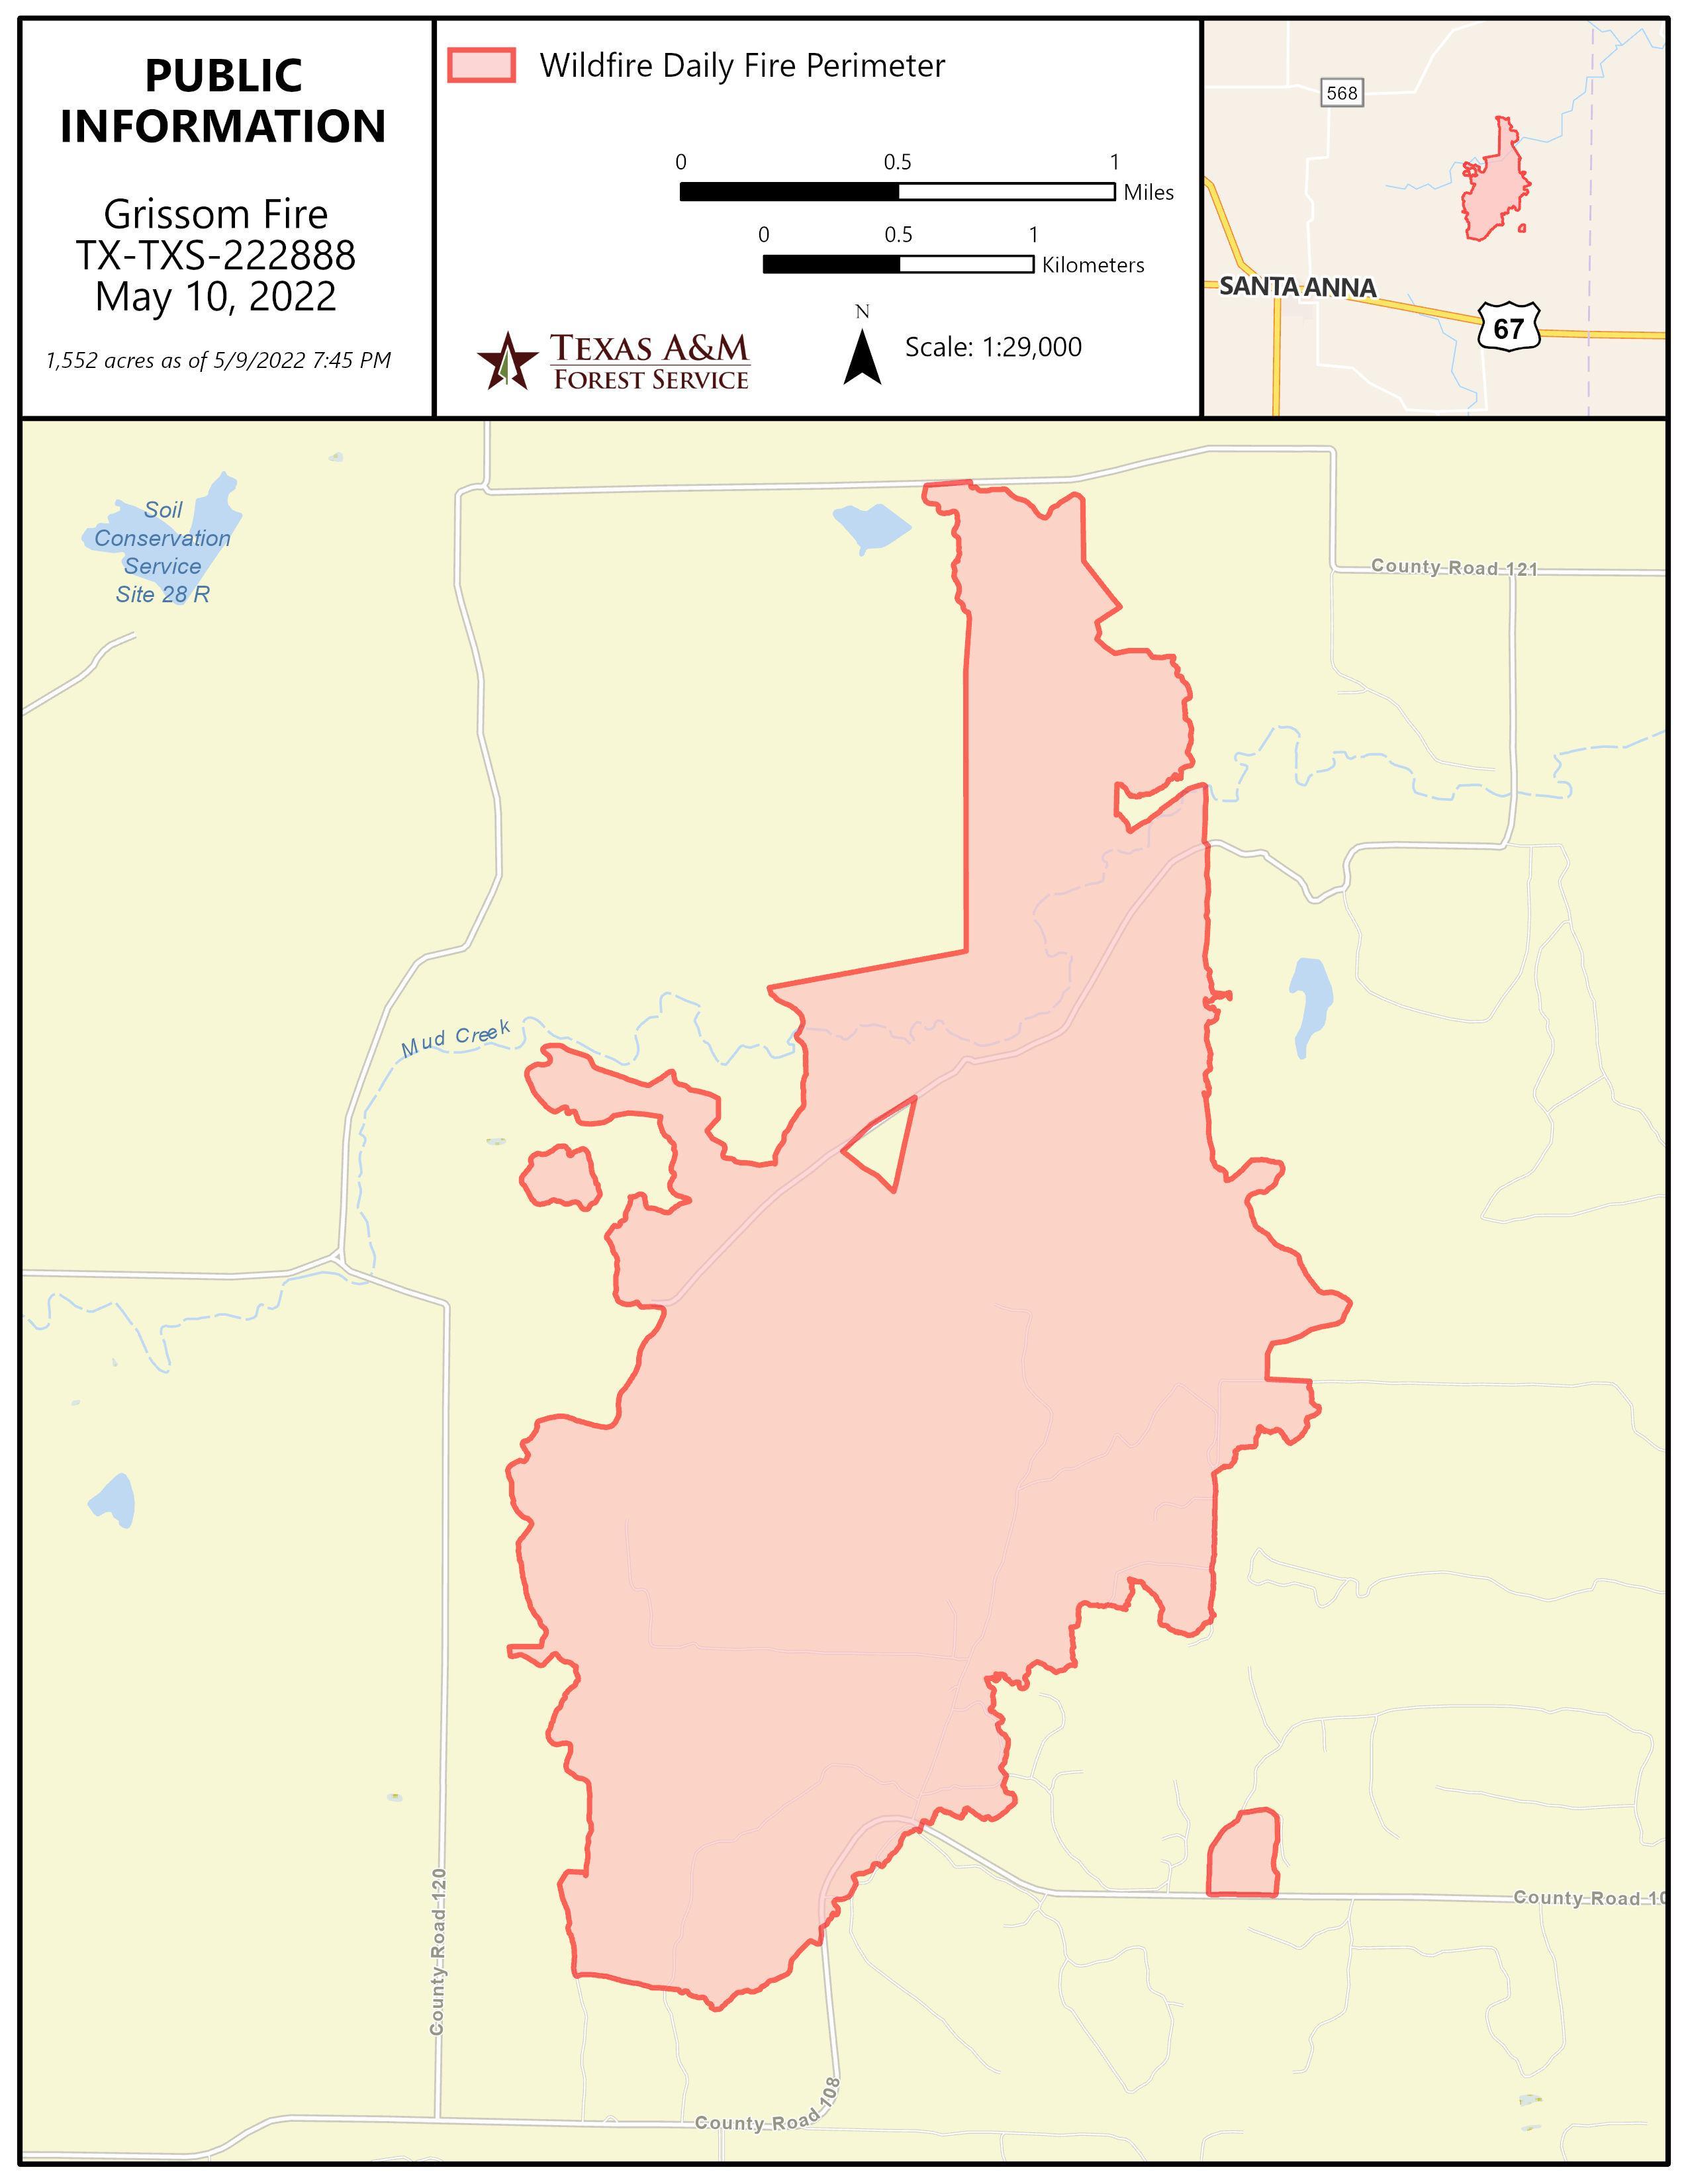 Final Map of the Grissom Fire